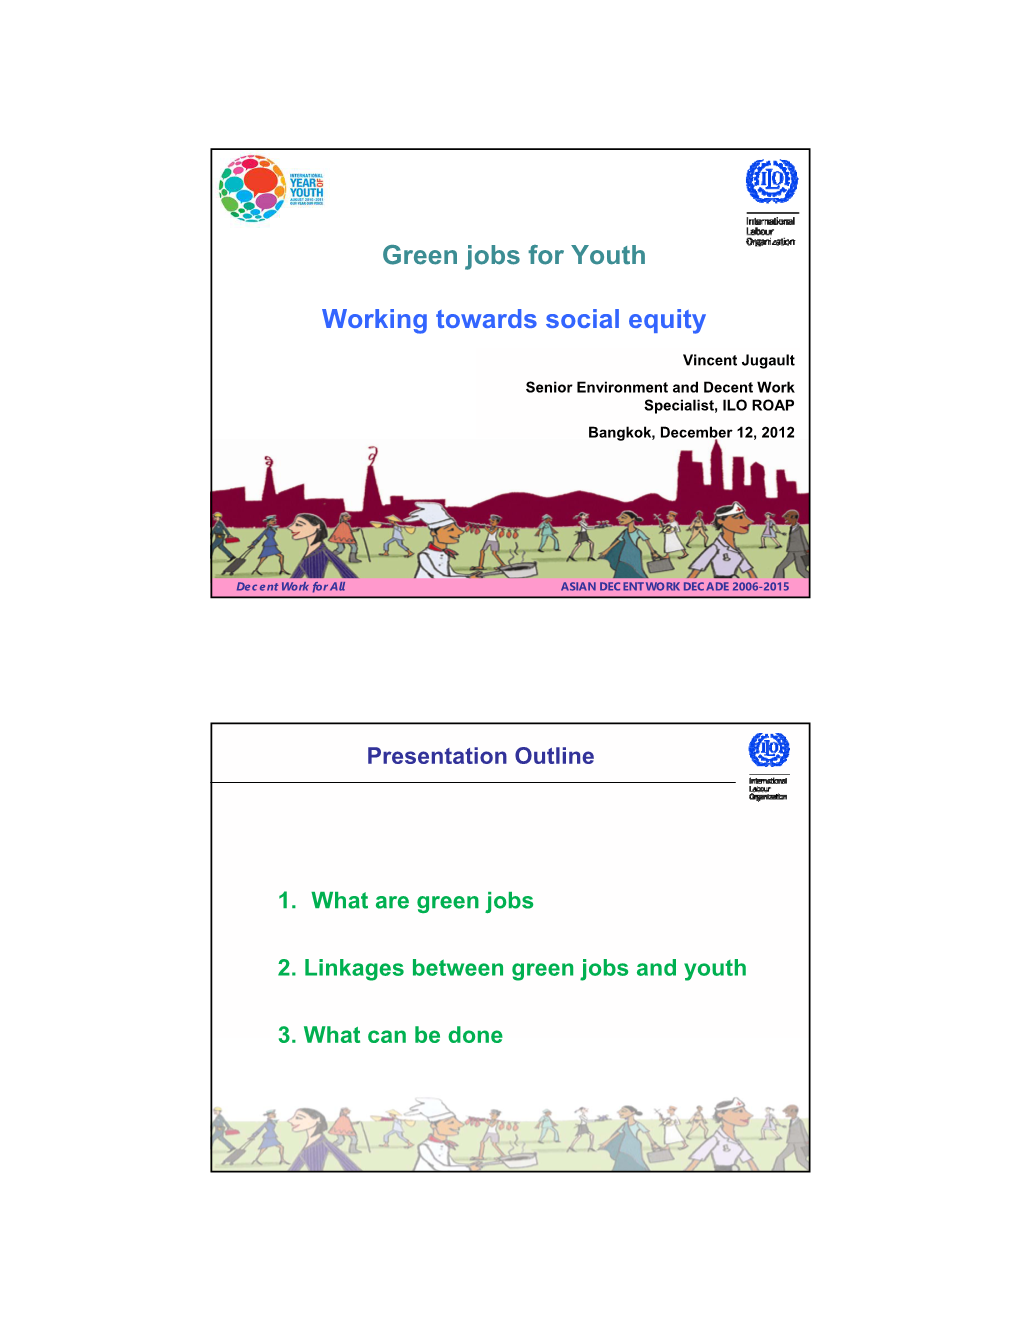 Green Jobs for Youth Working Towards Social Equity